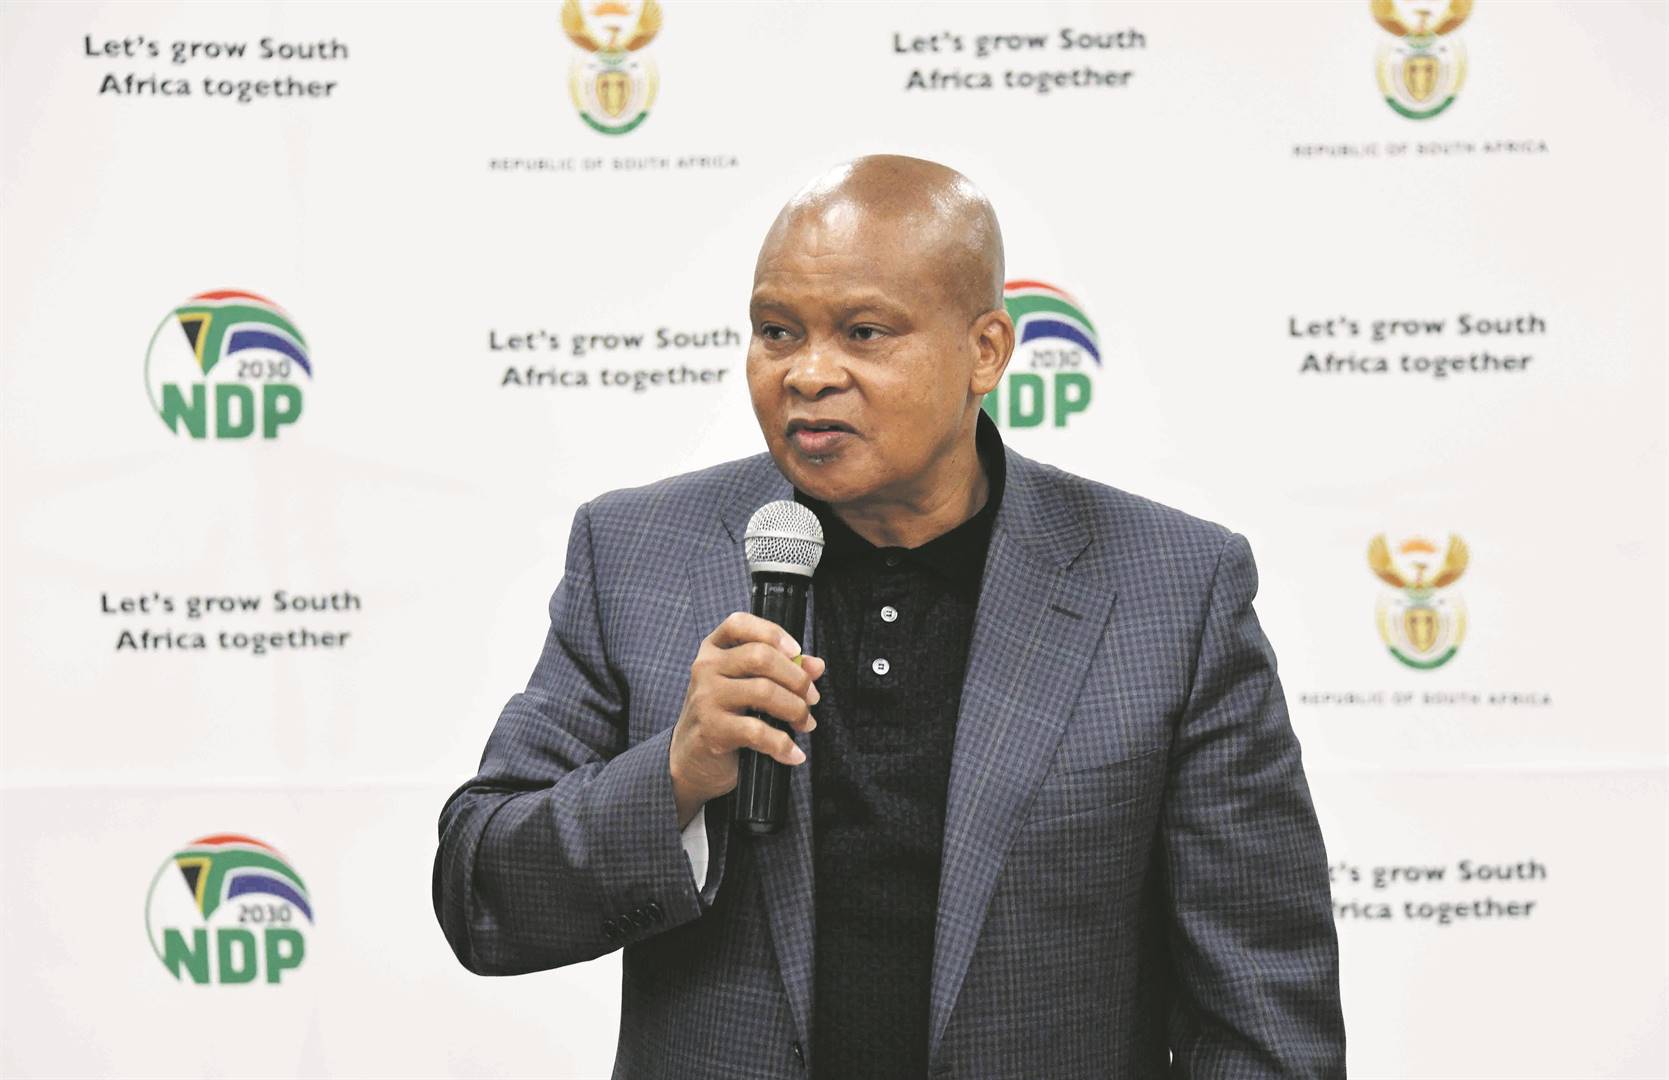 ANC provincial conference contenders form strong power blocks | Citypress - News24